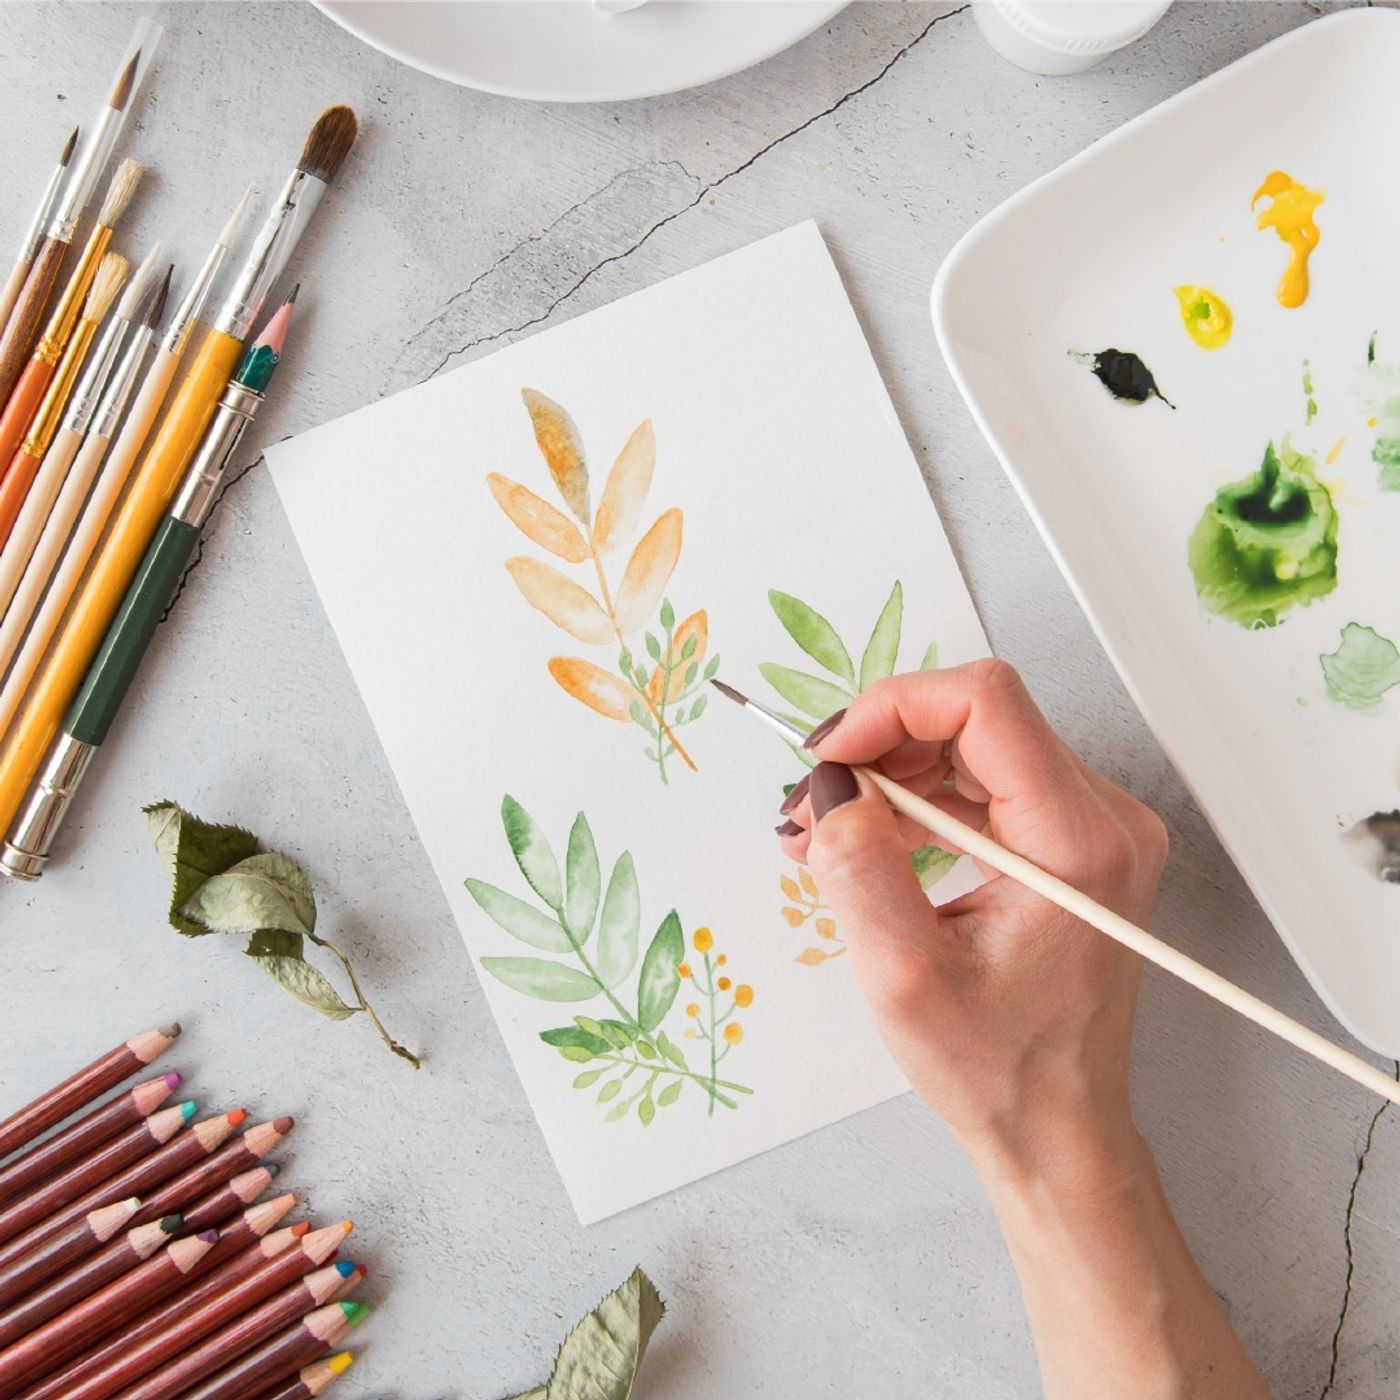 Visitors can have an enjoyable experience as they use watercolors to create their own pieces of art. Photo courtesy of the InterContinental Hanoi Westlake